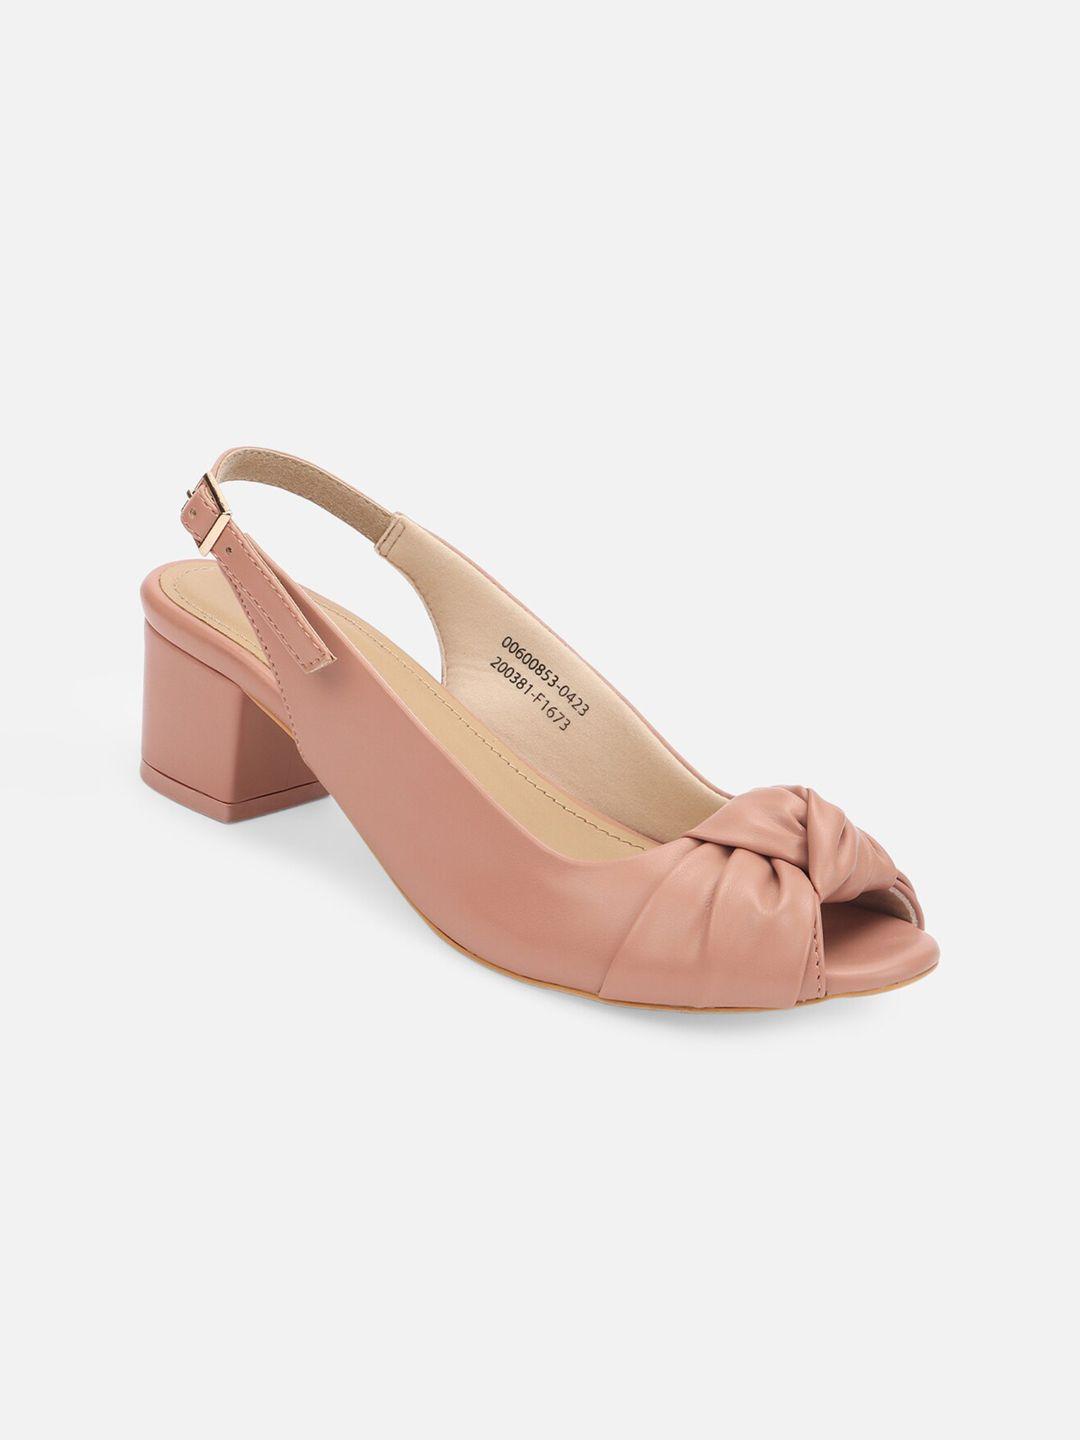 forever 21 bows block heeled peep toes